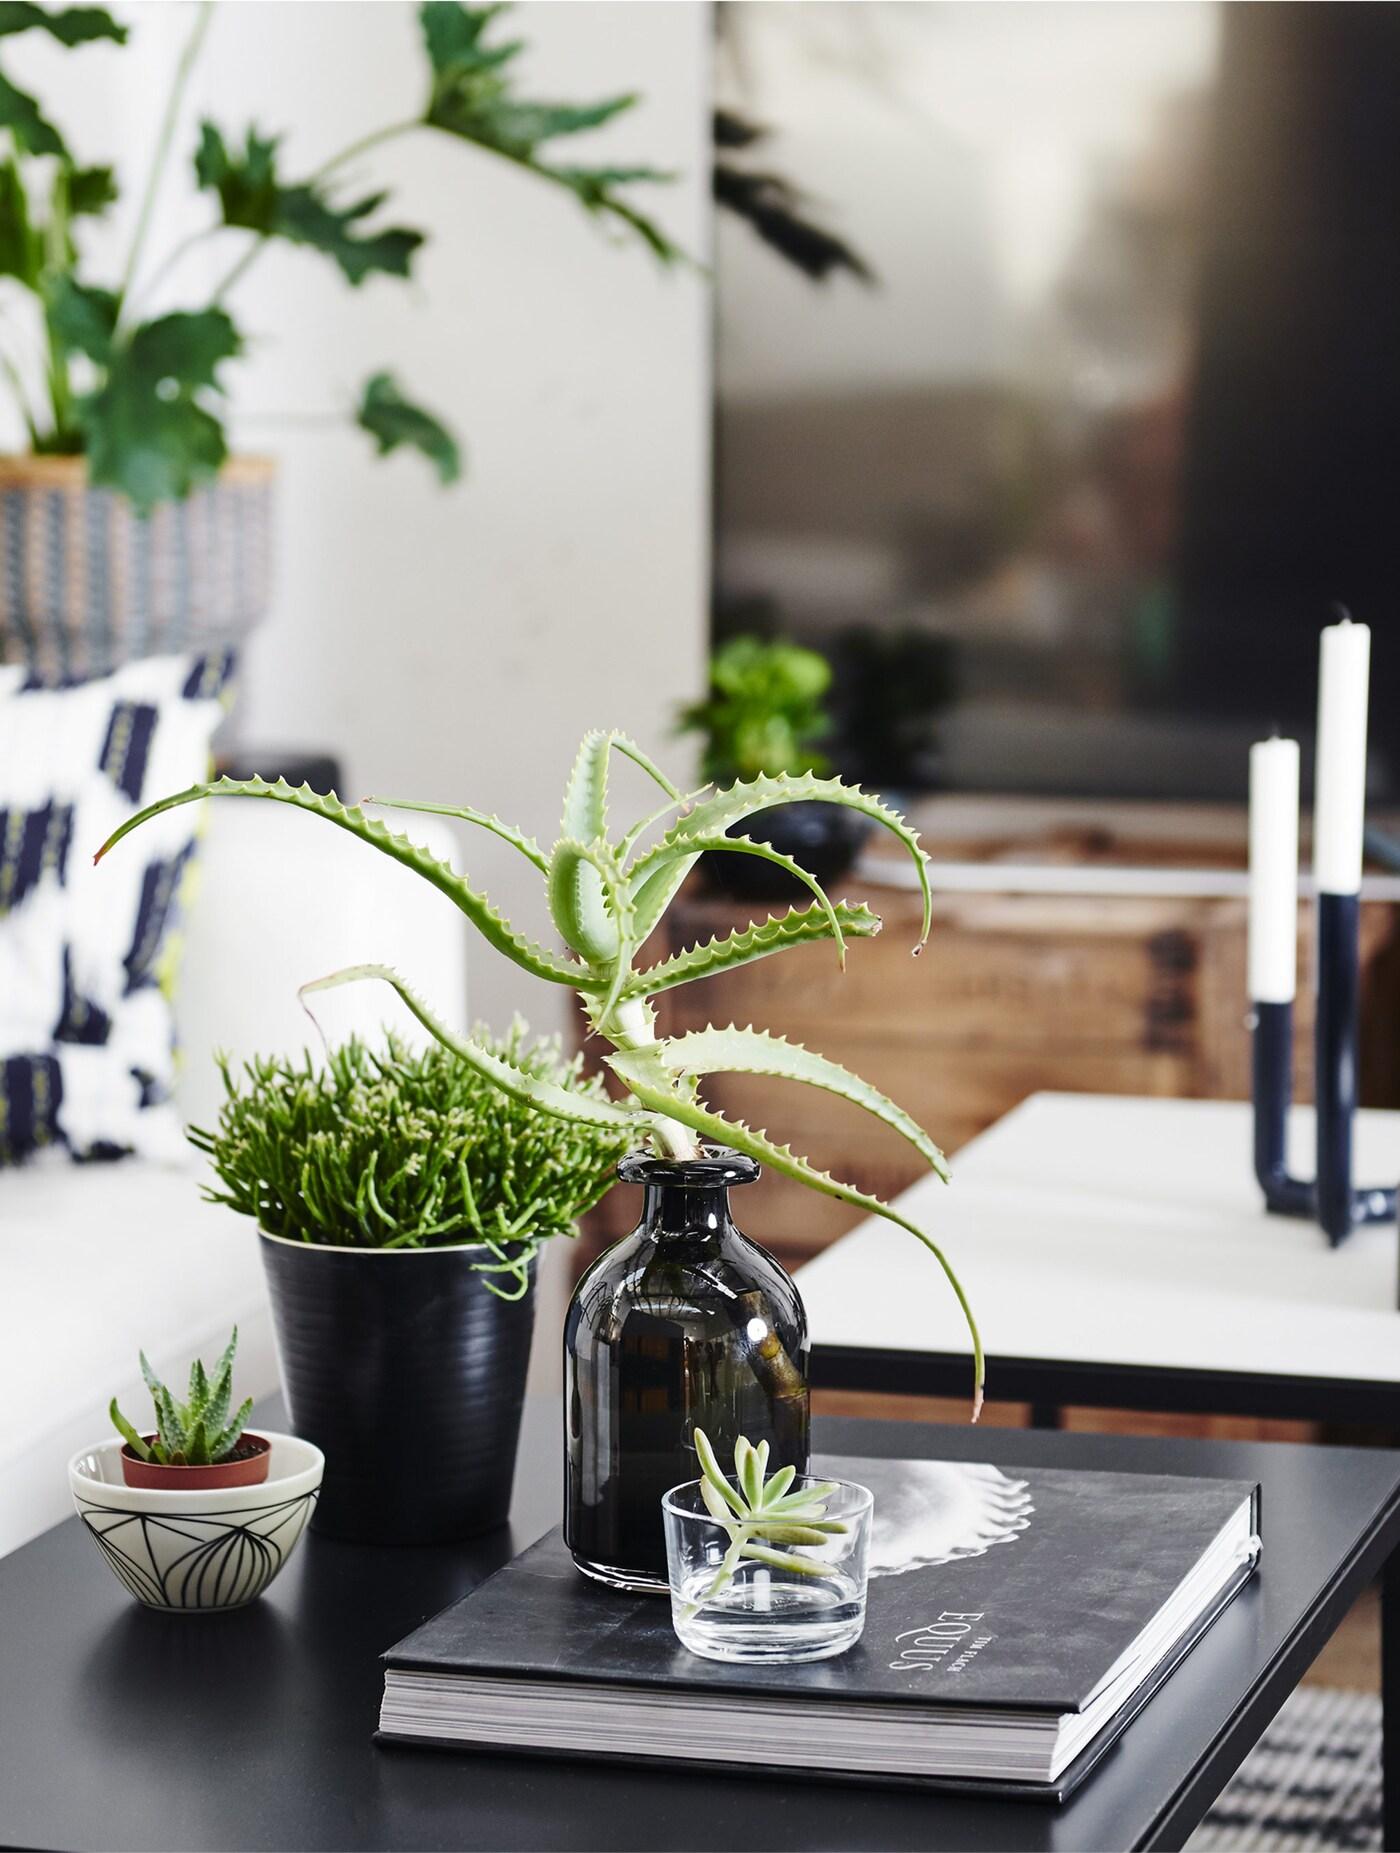 4 Gorgeous House Plant Ideas to Brighten Up Your Rooms